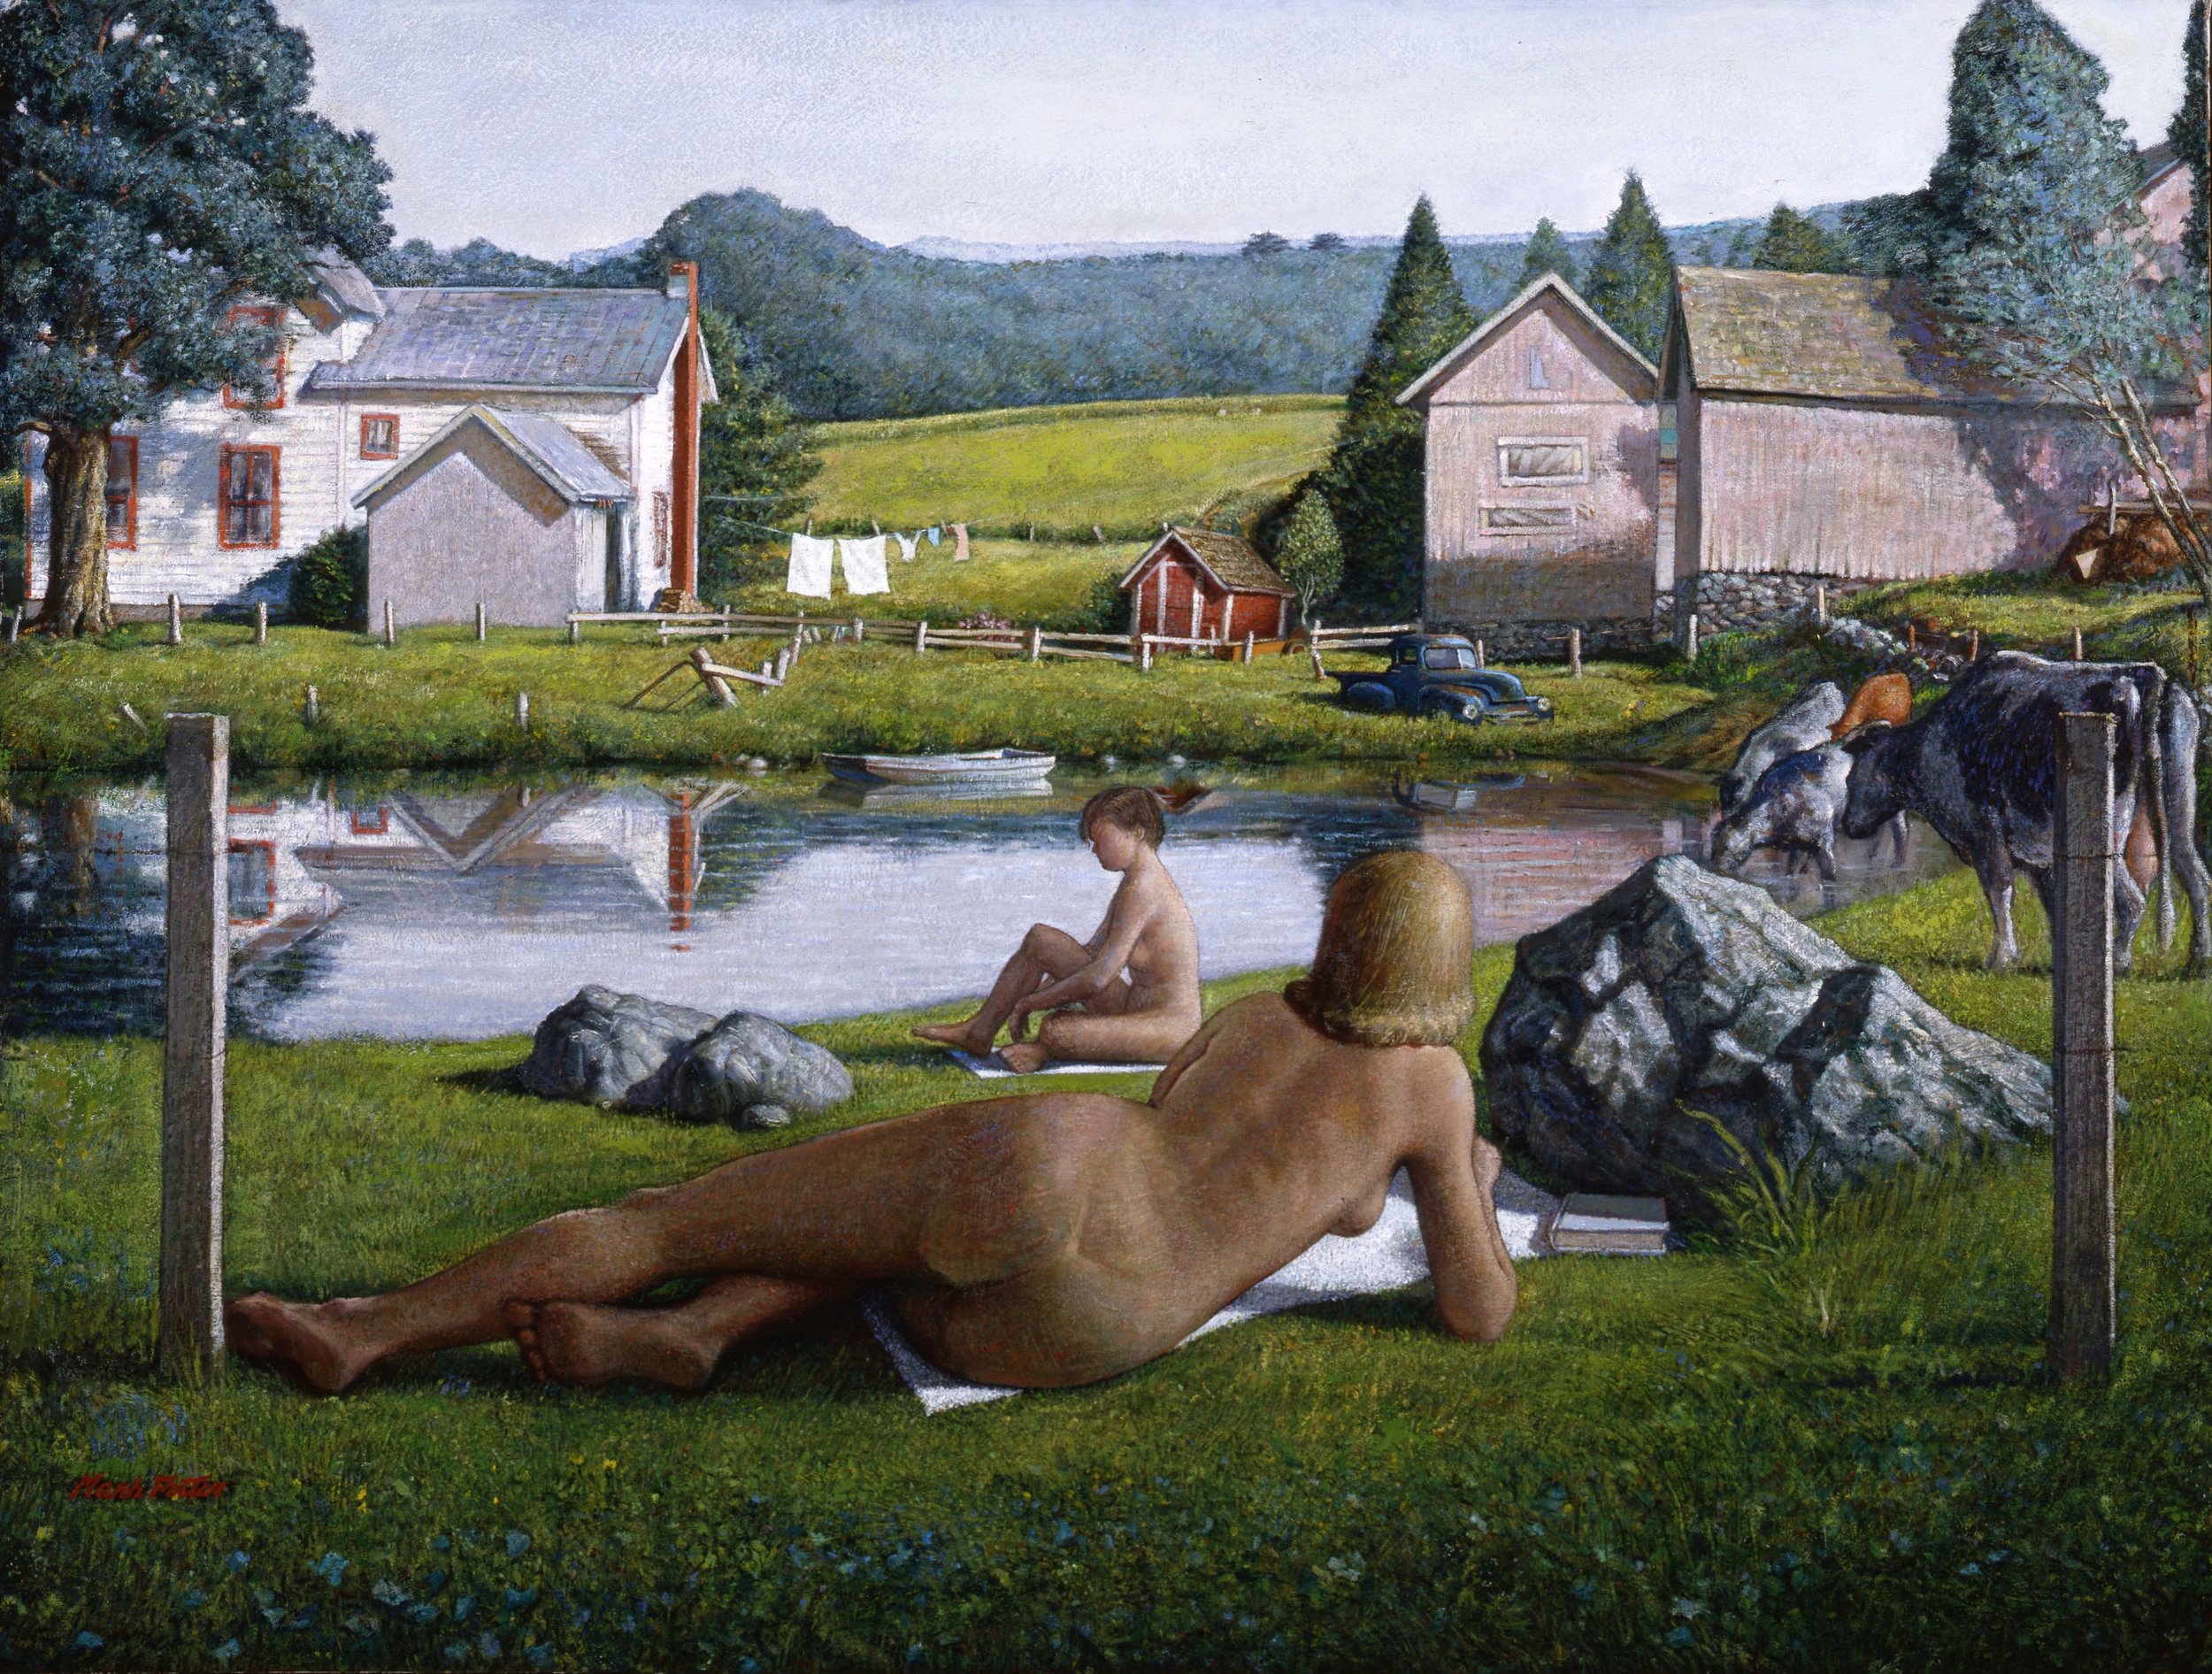    BATHERS AT JUDSON'S FARM. &nbsp; &nbsp;     1984, oil on canvas. &nbsp;51.5 x 79.5 inches. &nbsp;Private Collection.    